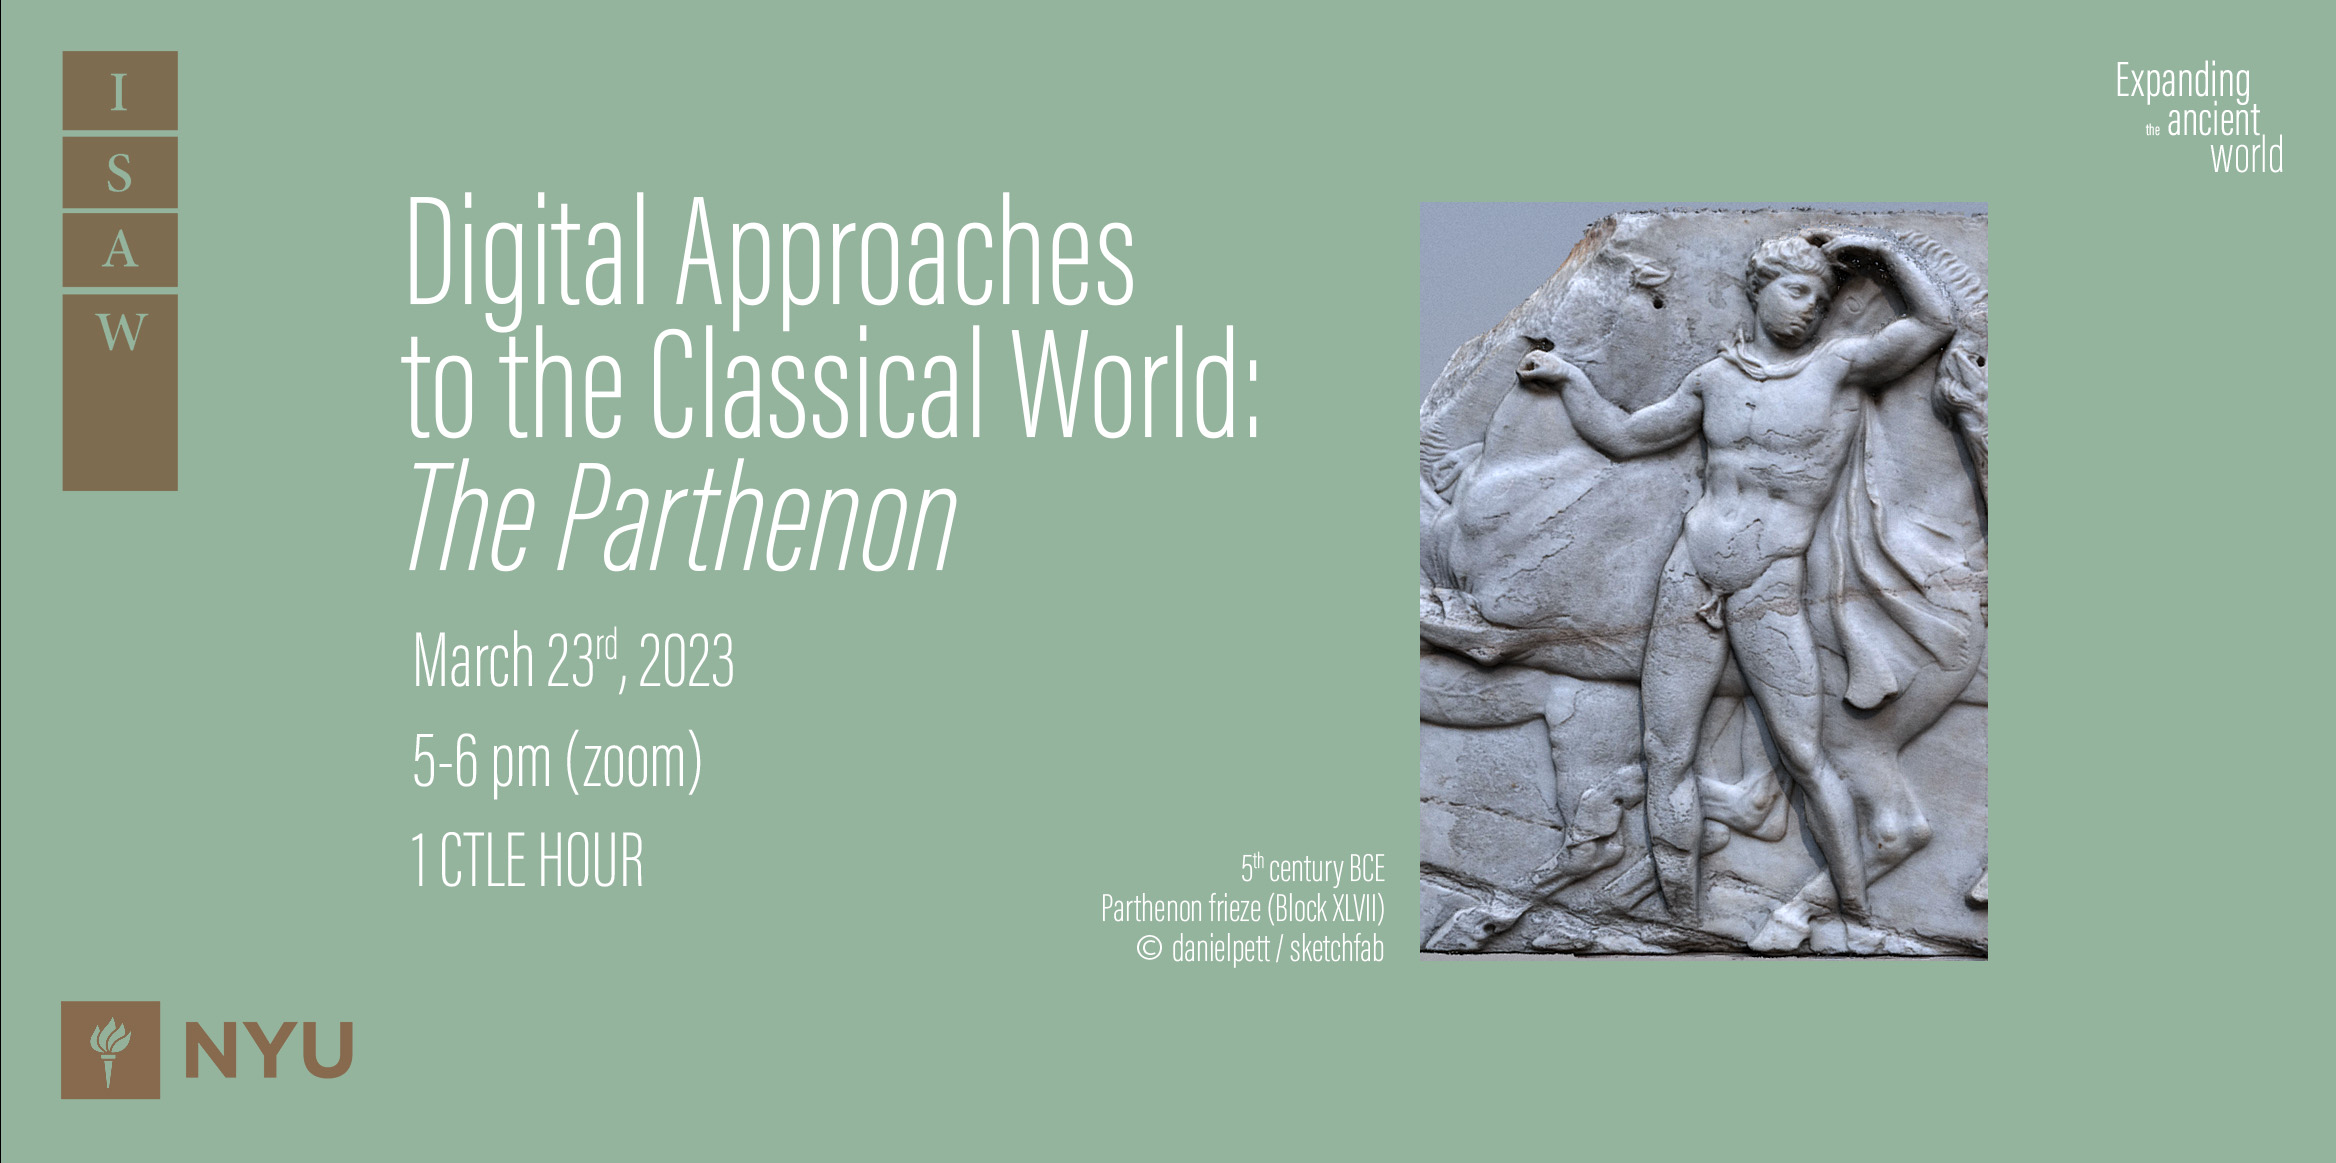 Expanding the Ancient World Workshop: